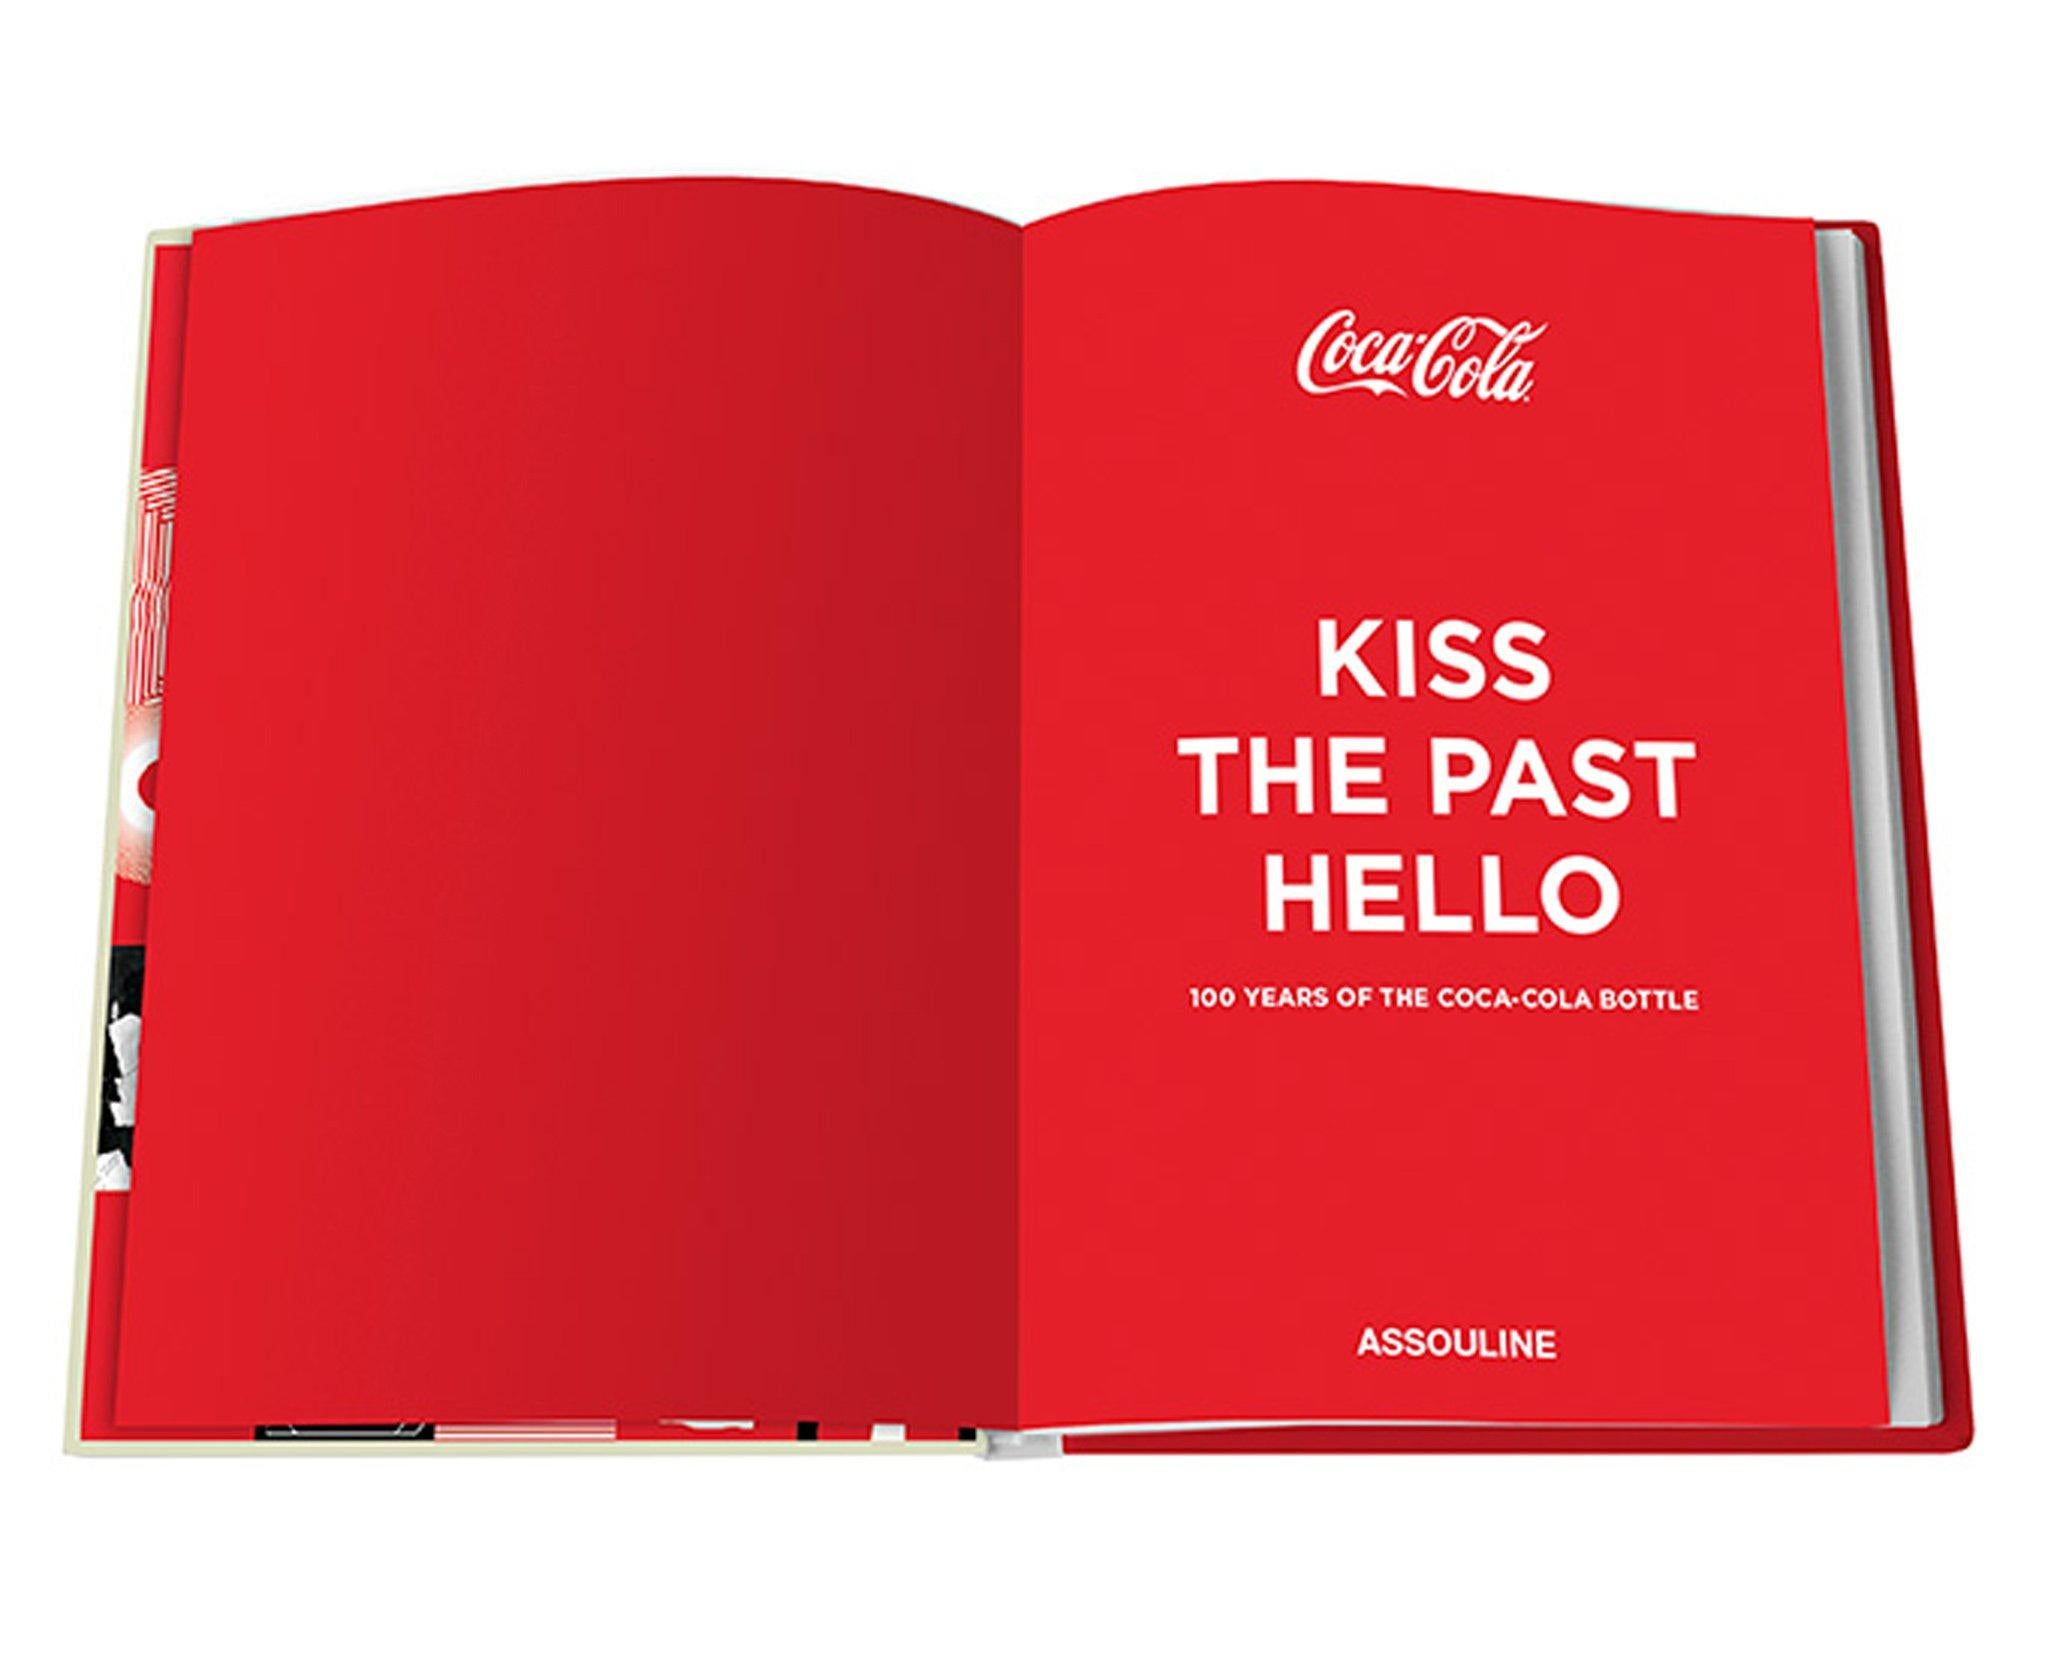 Contemporary In Stock in Los Angeles, Coca-Cola Kiss the past Hello by Stephen Bayley